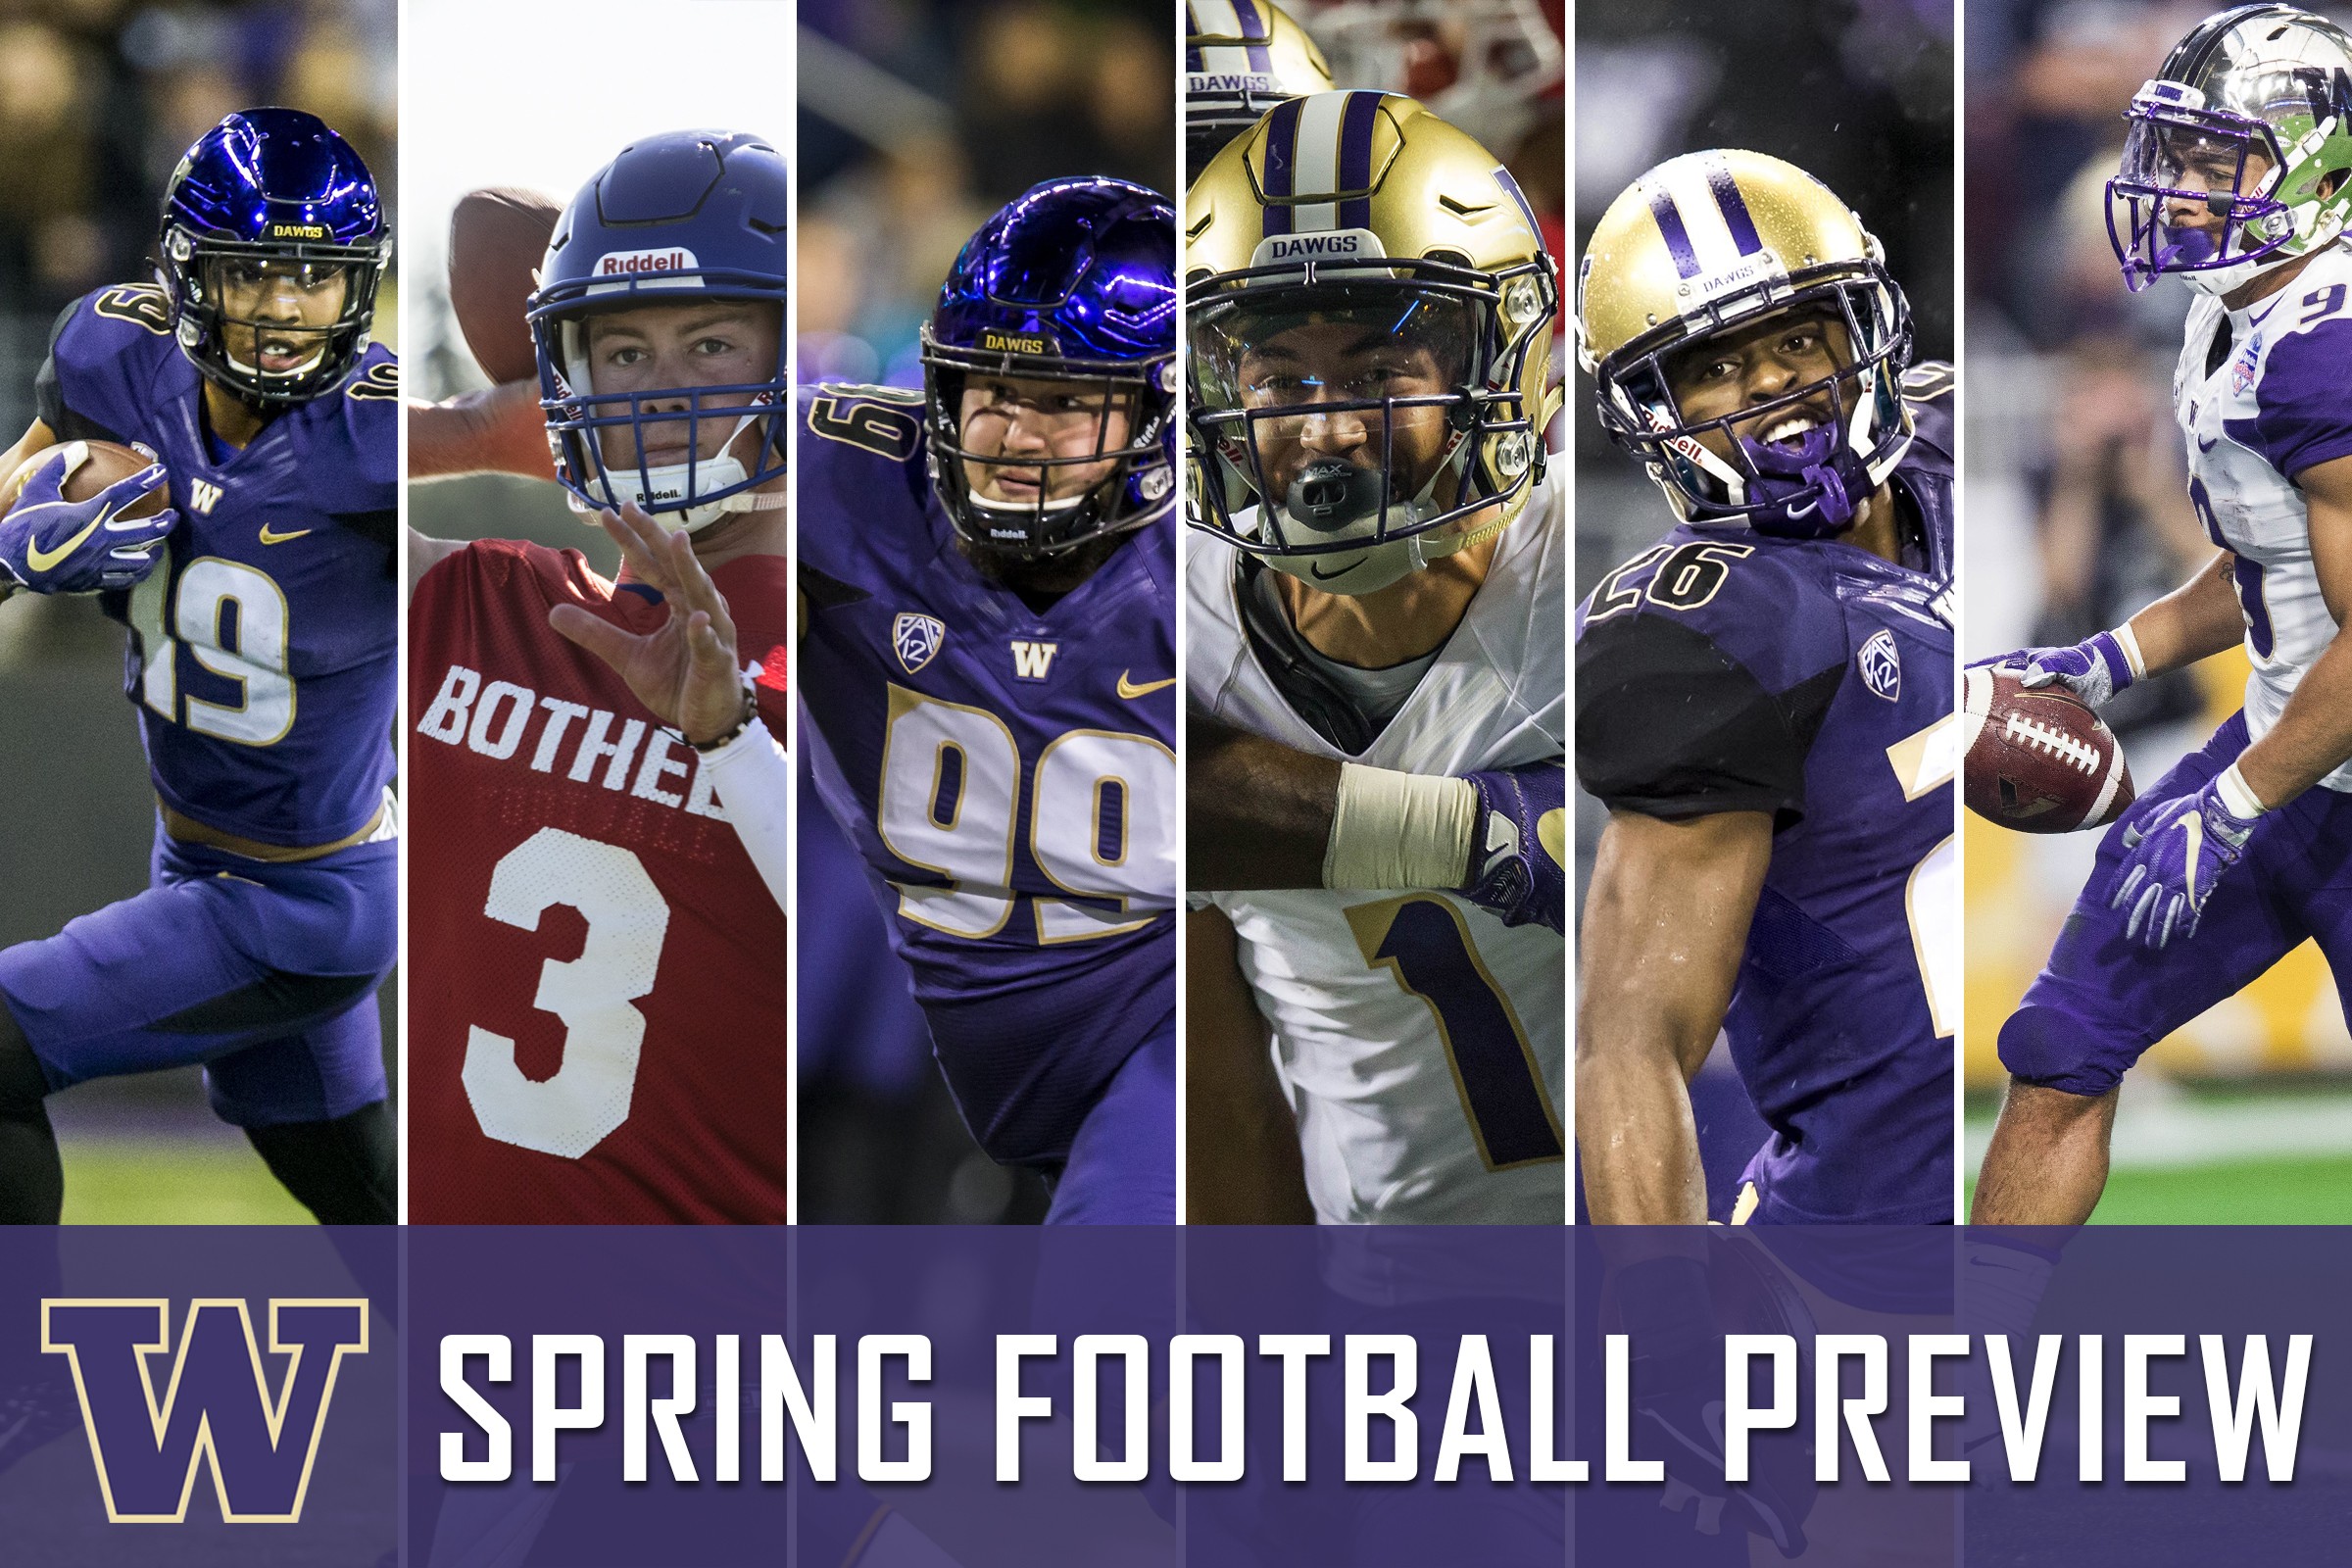 UW spring football preview All five starters are back from Pac12’s